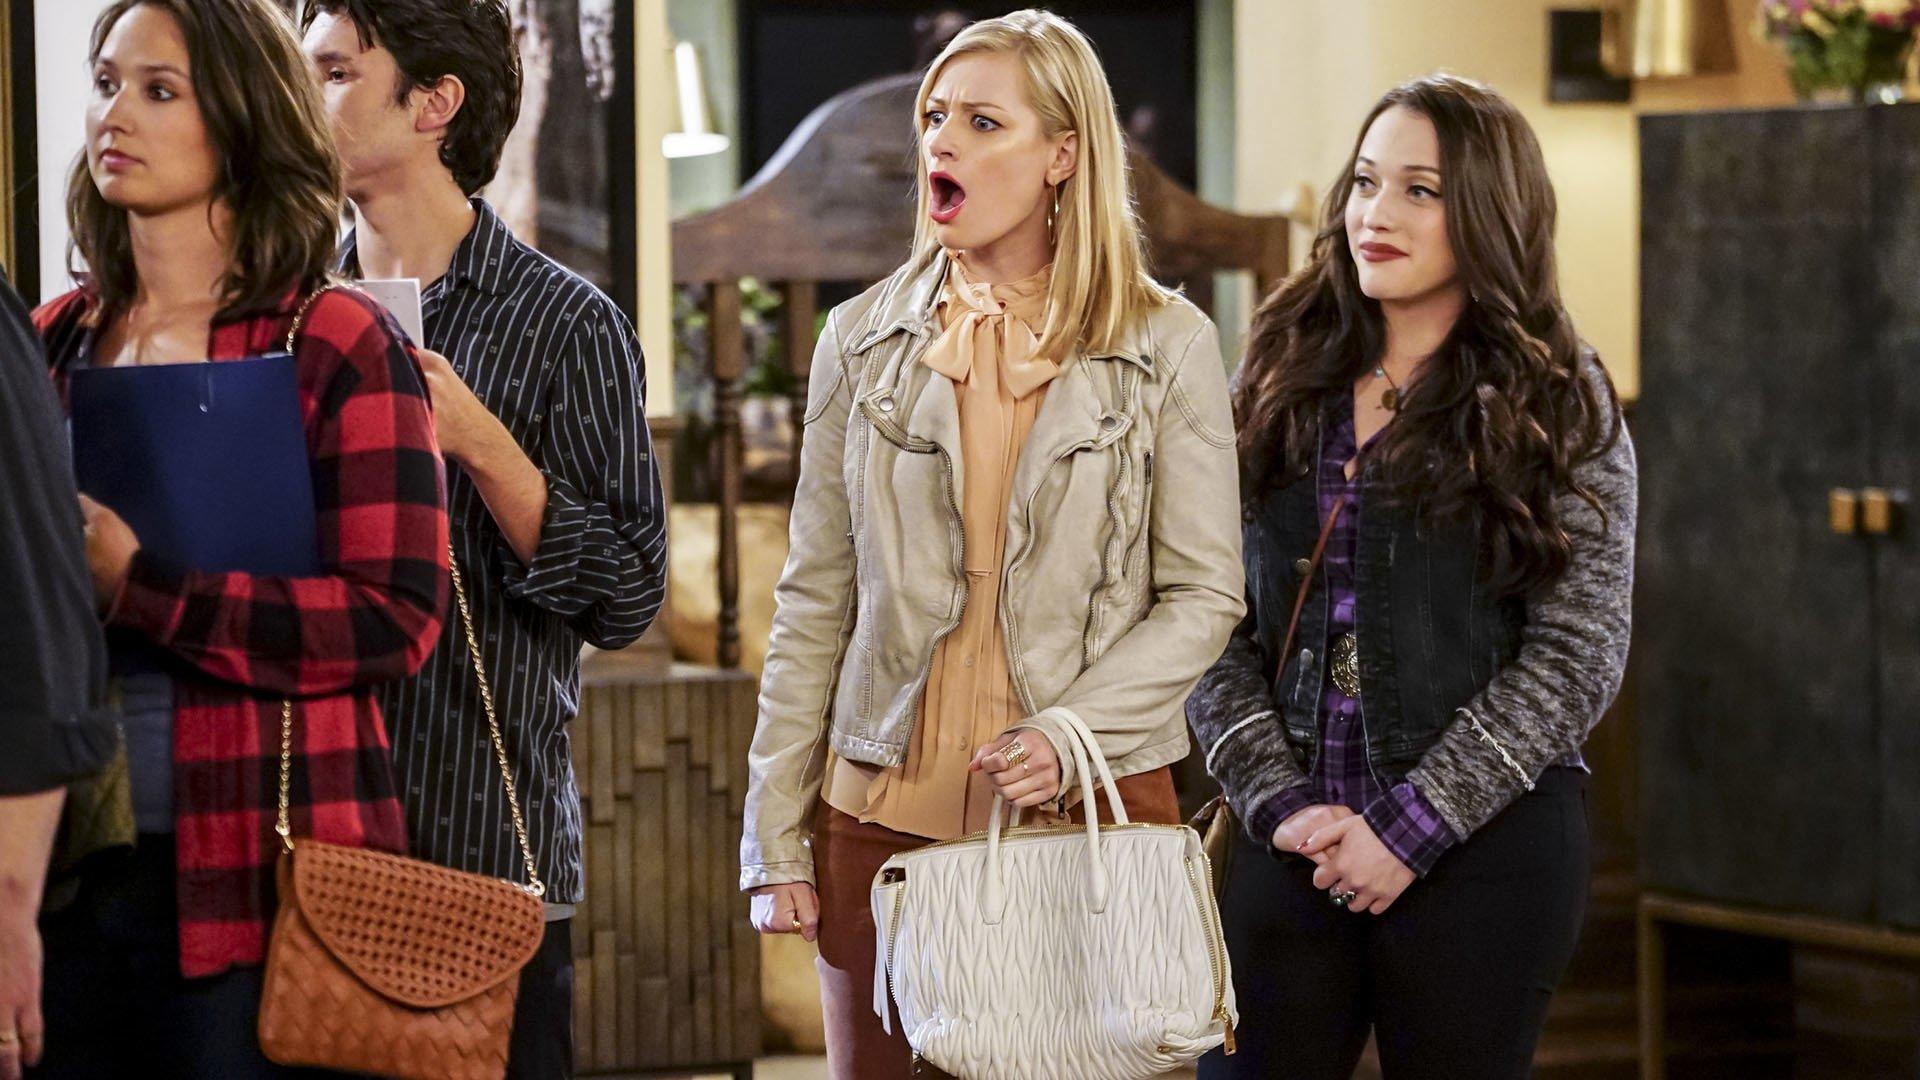 2 Broke Girls (S06E13): And the Stalking Dead Summary: Max and Caroline get their big bre...